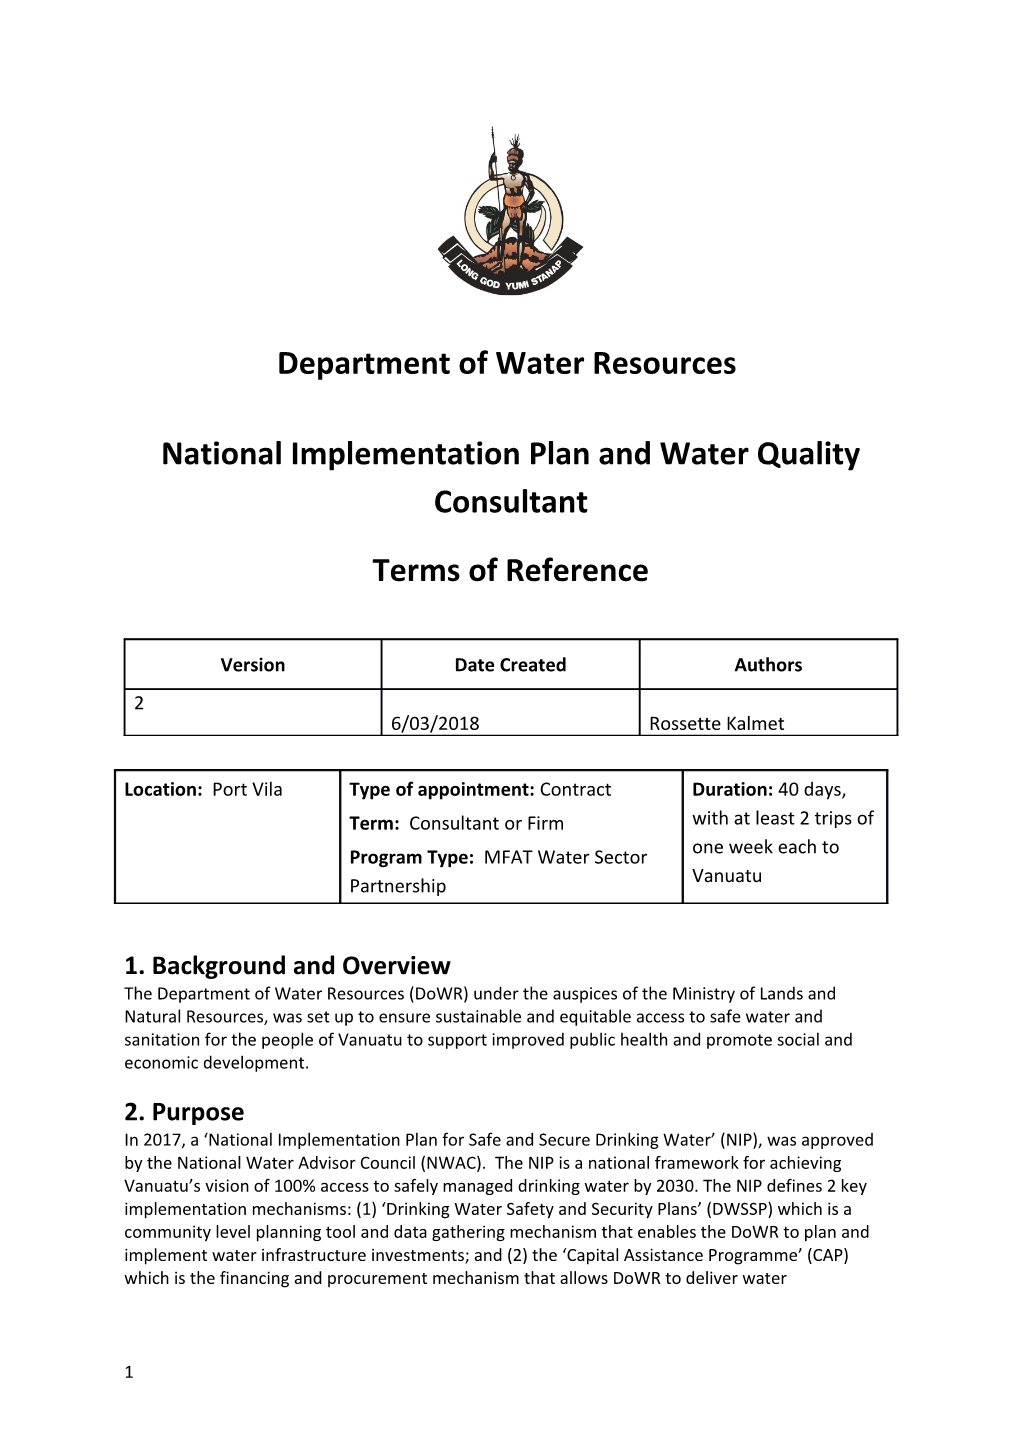 National Implementation Plan and Water Quality Consultant